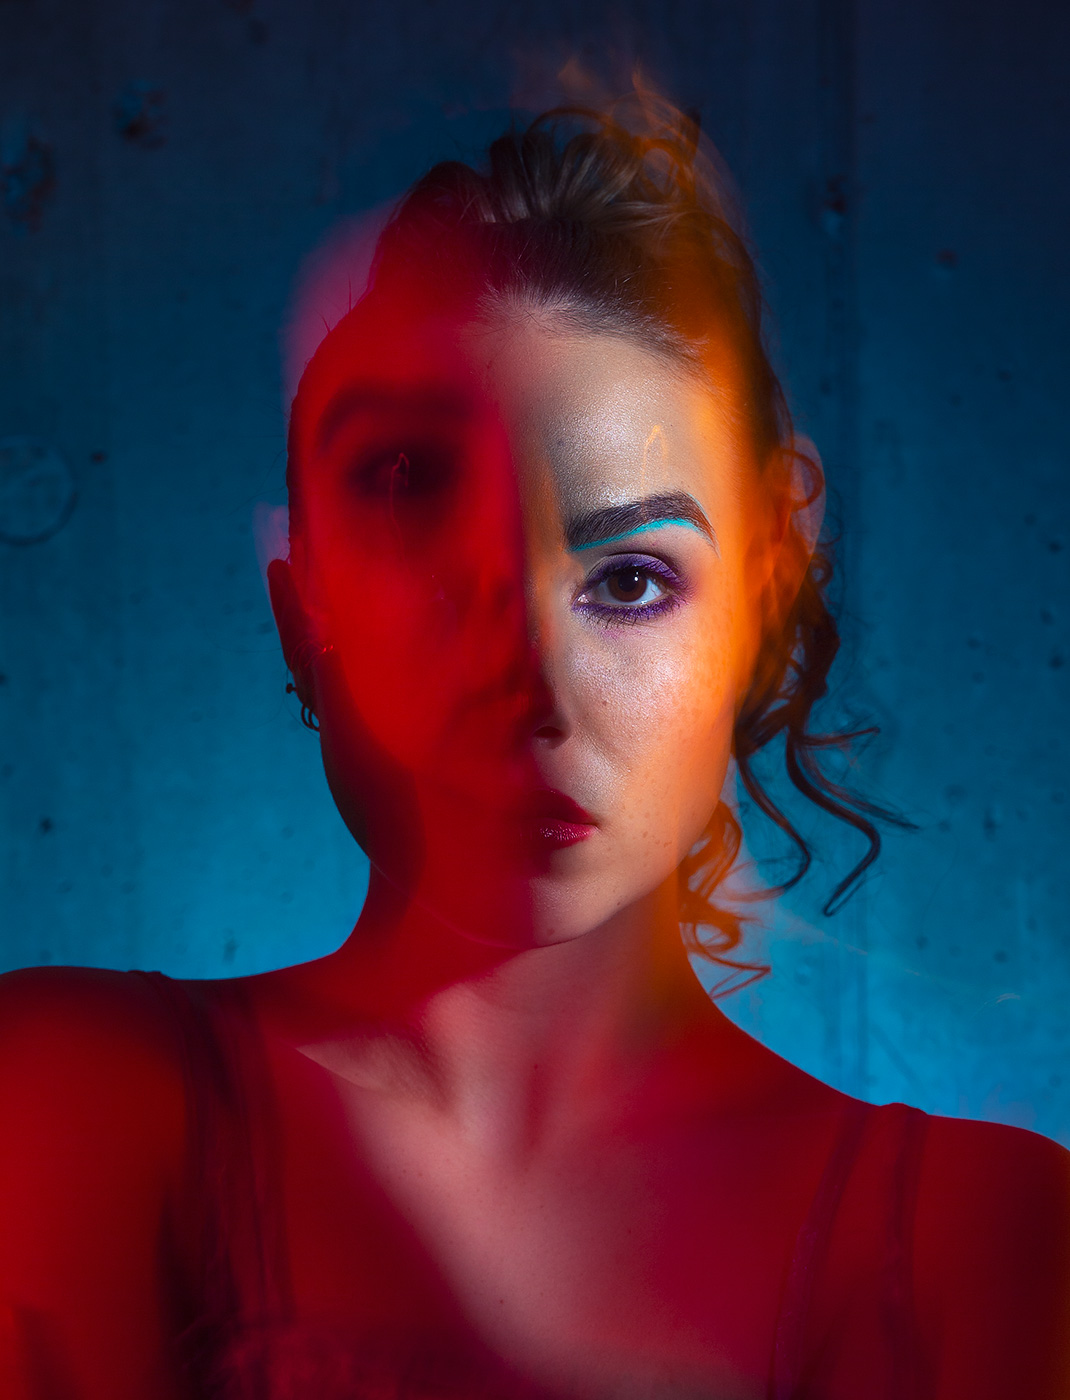 Colorful portrait of woman with distorted face by long exposure in reds and blues.